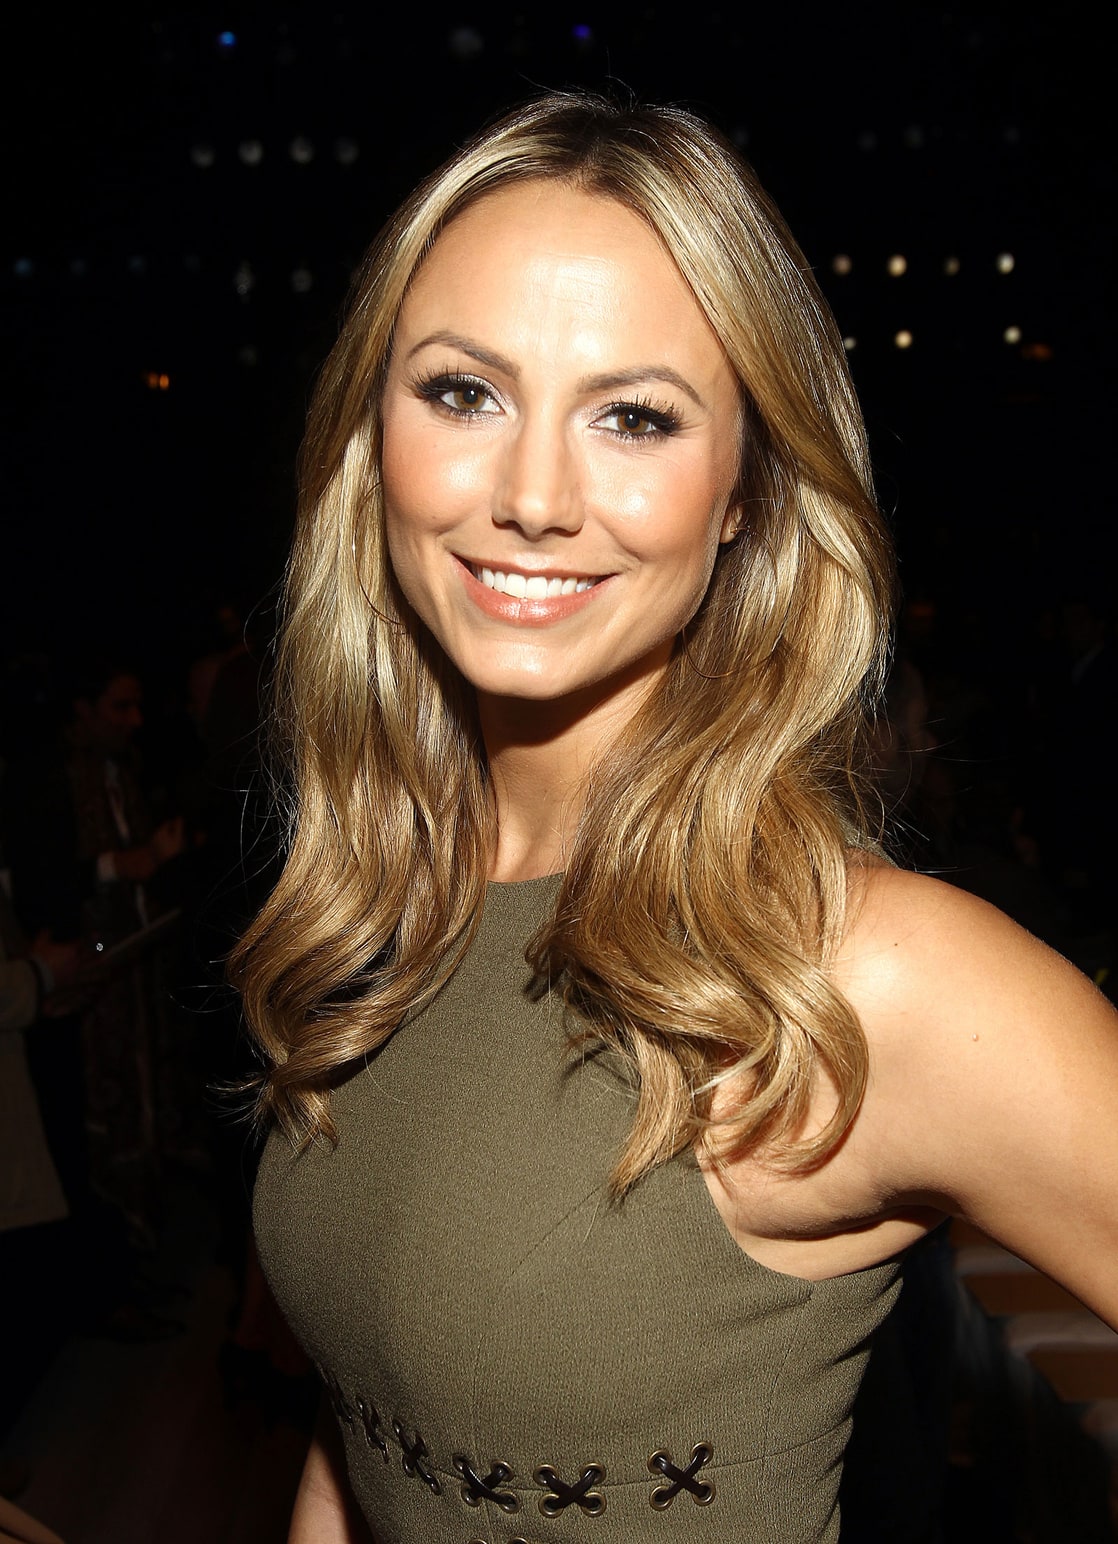 Image Of Stacy Keibler 